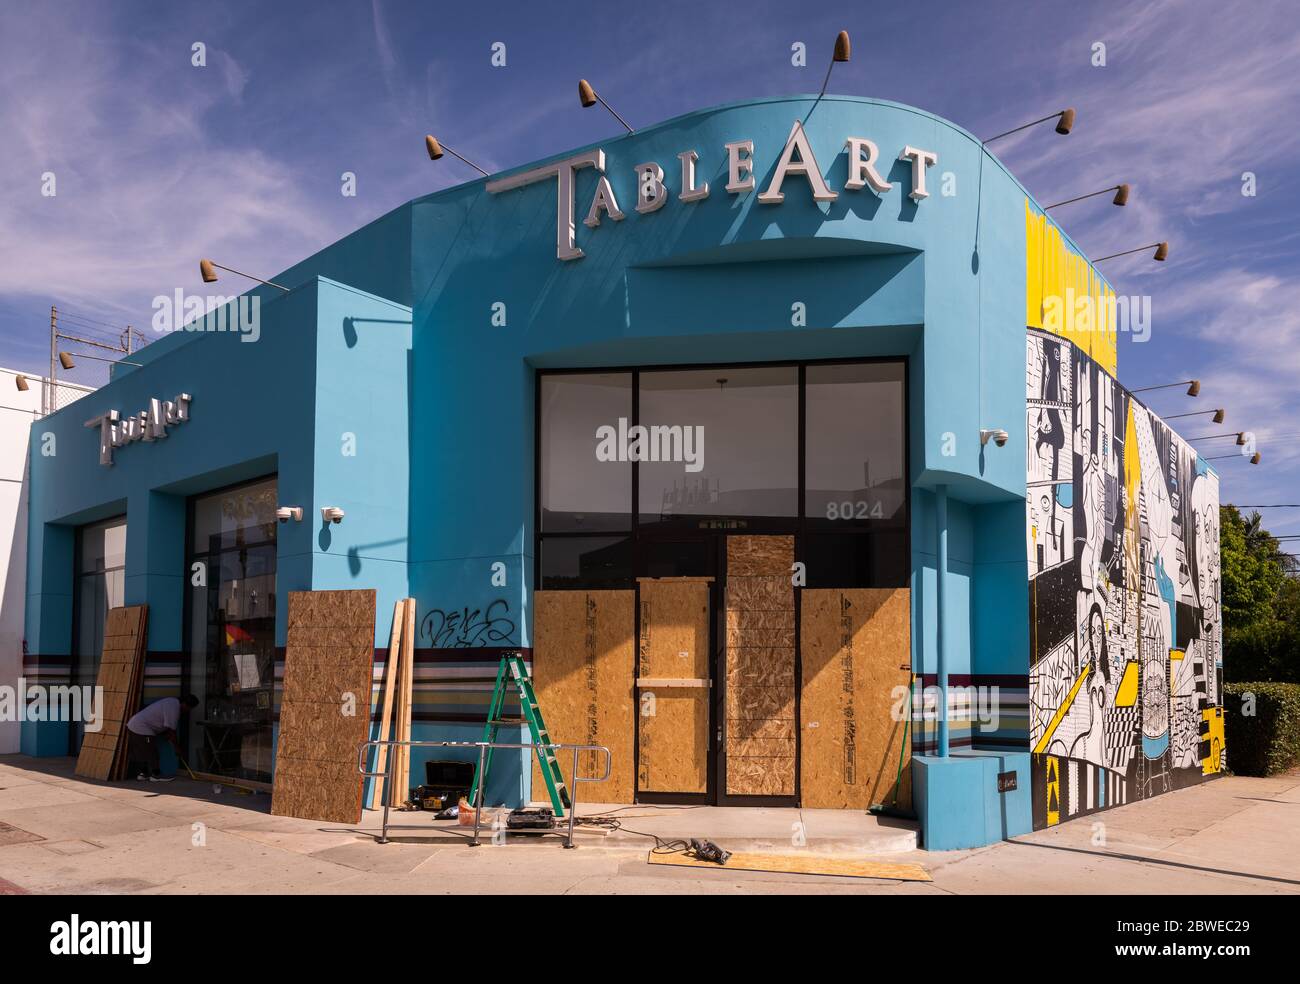 Los Angeles, USA. 31st May, 2020. Retail store on Melrose Avenue in Los Angeles in the process of boarding up broken windows following George Floyd protests in Los Angeles, USA. Credit: Jim Newberry/Alamy Live News. Stock Photo